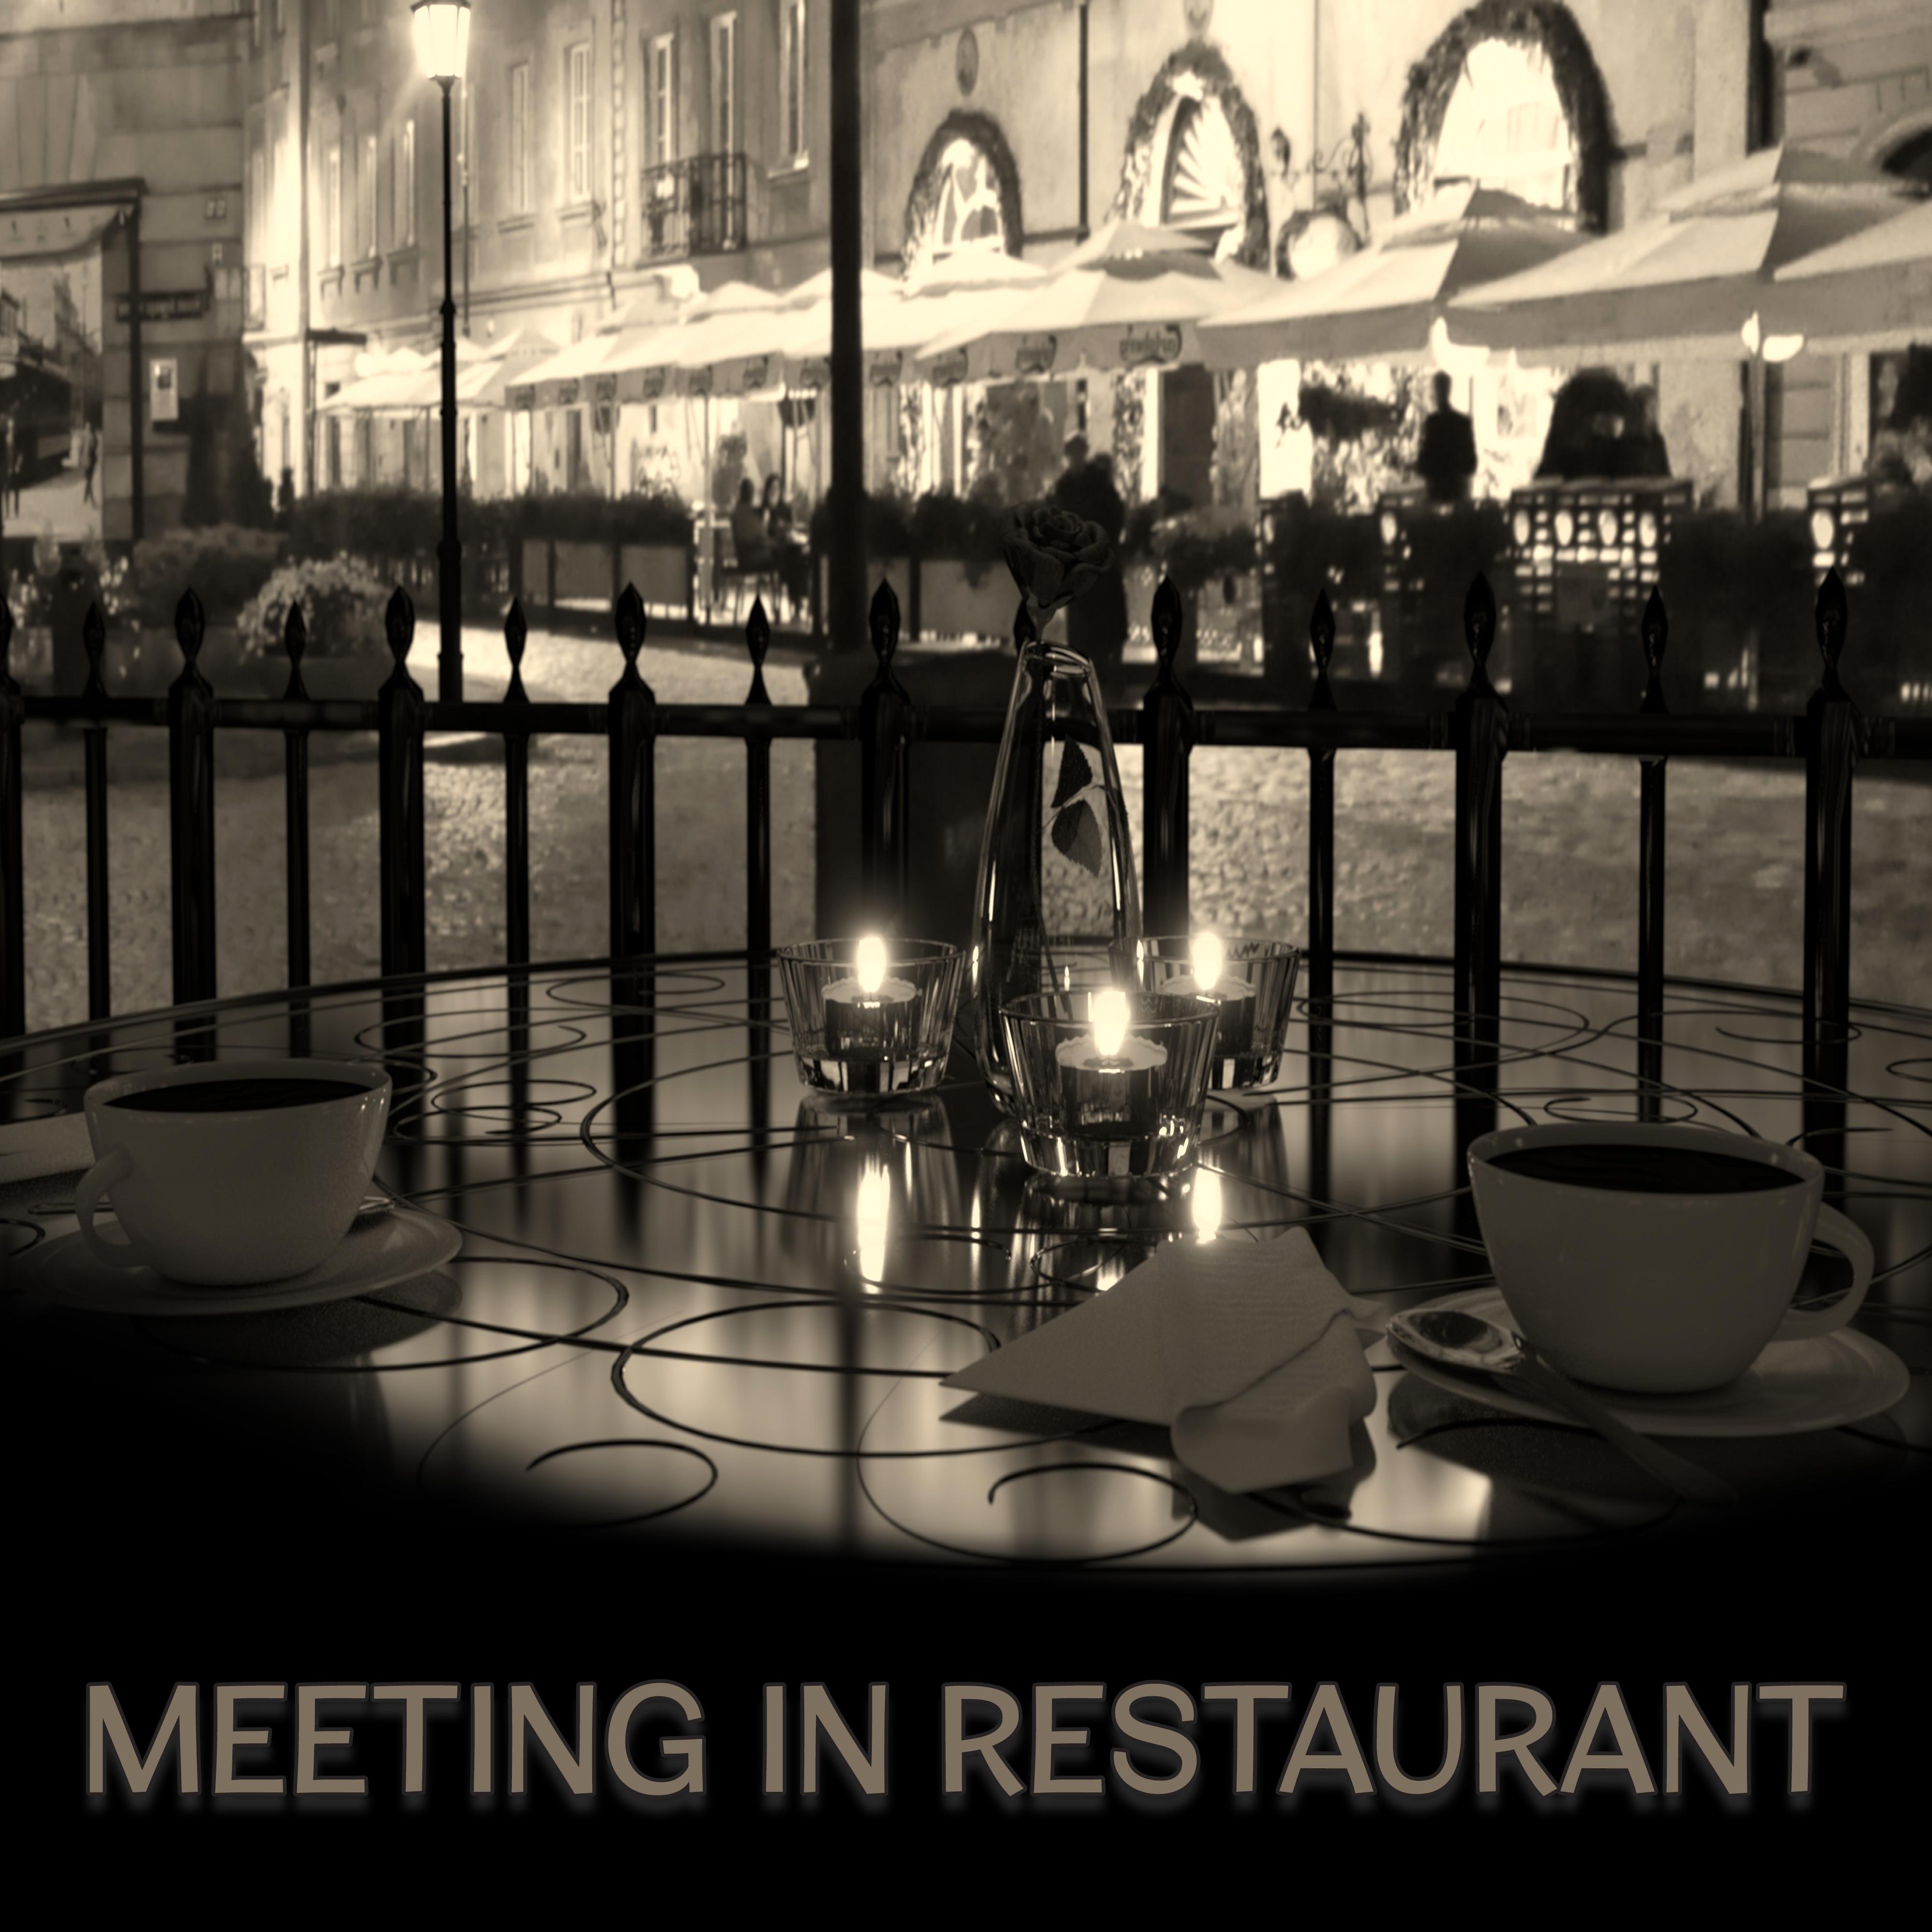 Meeting in Restaurant – Piano Bar, Restaurant Jazz Music, Dinner with Family, Relaxation Sounds, Smooth Jazz